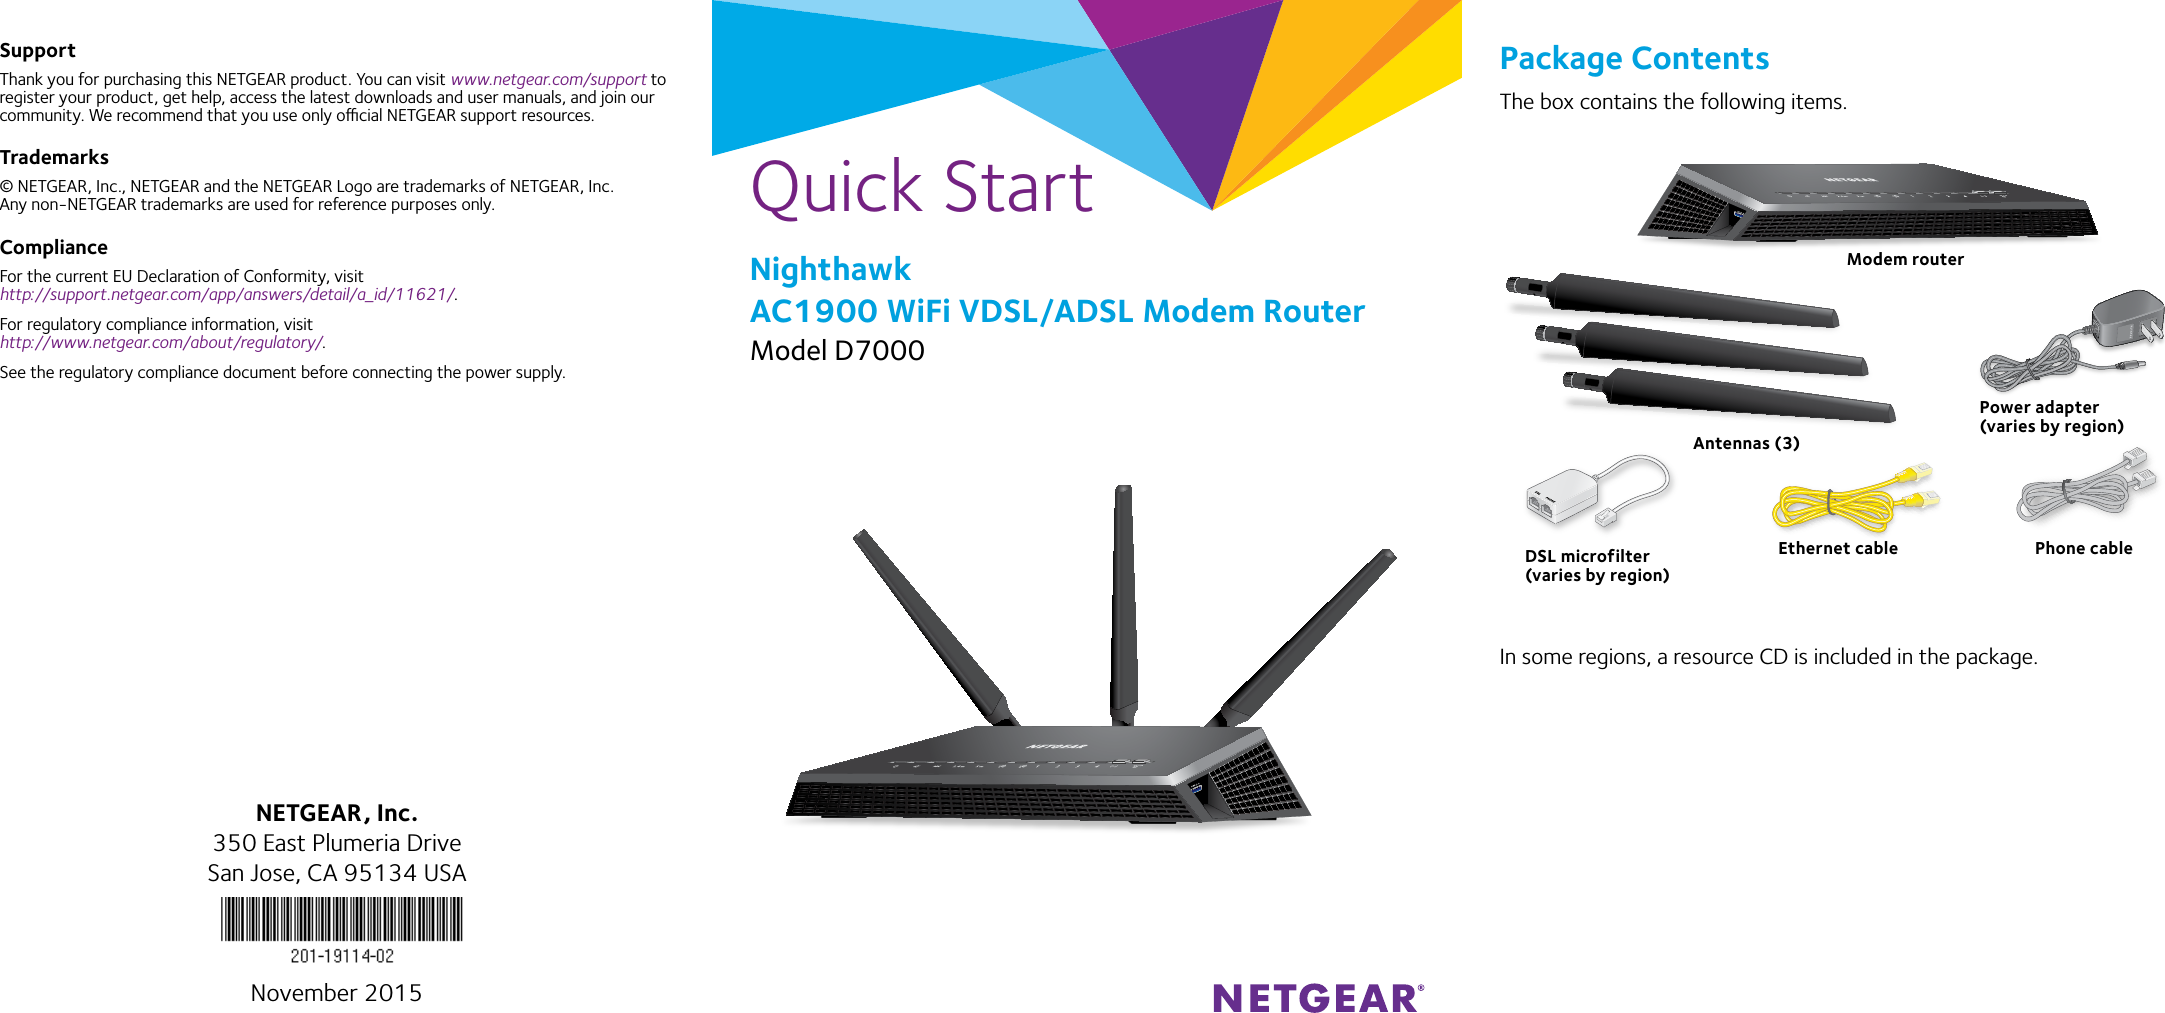 Quick StartNighthawk AC1900 WiFi VDSL/ADSL Modem RouterModel D7000SupportThank you for purchasing this NETGEAR product. You can visit www.netgear.com/support to register your product, get help, access the latest downloads and user manuals, and join our community. We recommend that you use only ocial NETGEAR support resources.Trademarks© NETGEAR, Inc., NETGEAR and the NETGEAR Logo are trademarks of NETGEAR, Inc.  Any non‑NETGEAR trademarks are used for reference purposes only.ComplianceFor the current EU Declaration of Conformity, visit  http://support.netgear.com/app/answers/detail/a_id/11621/. For regulatory compliance information, visit http://www.netgear.com/about/regulatory/.See the regulatory compliance document before connecting the power supply.Package ContentsThe box contains the following items.In some regions, a resource CD is included in the package.NETGEAR, Inc.350 East Plumeria DriveSan Jose, CA 95134 USANovember 2015Modem routerEthernet cablePower adapter(varies by region)Antennas (3)DSL microfilter(varies by region)Phone cable